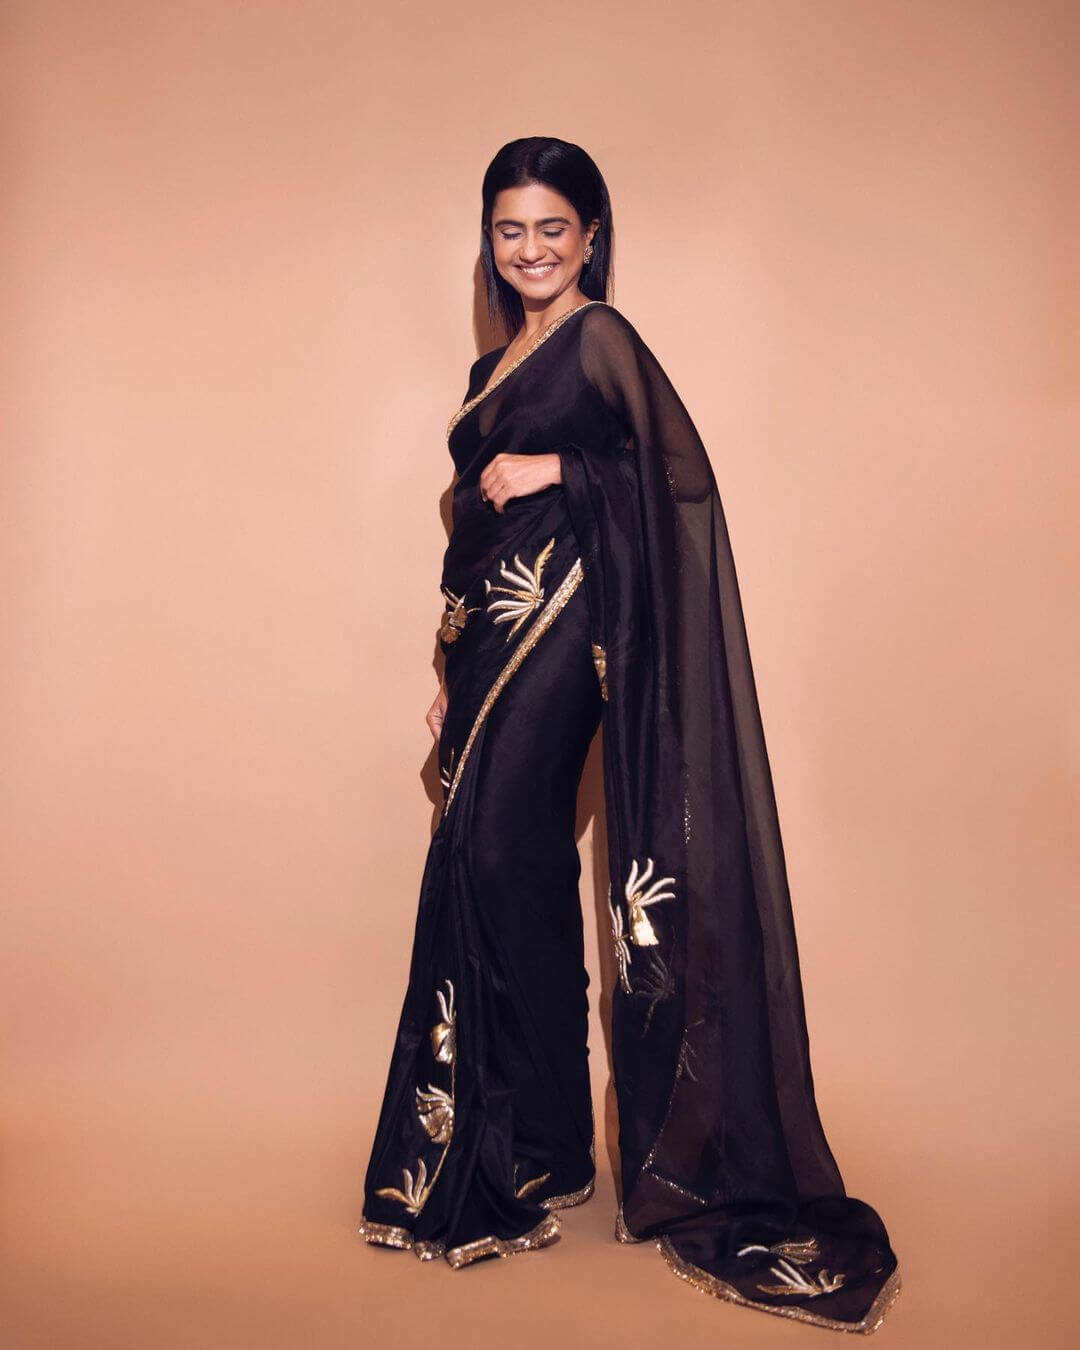 Amruta Subhash Look Gorgeous In Black Saree With Deep Neck Blouse Amruta Subhash Outfit And Looks